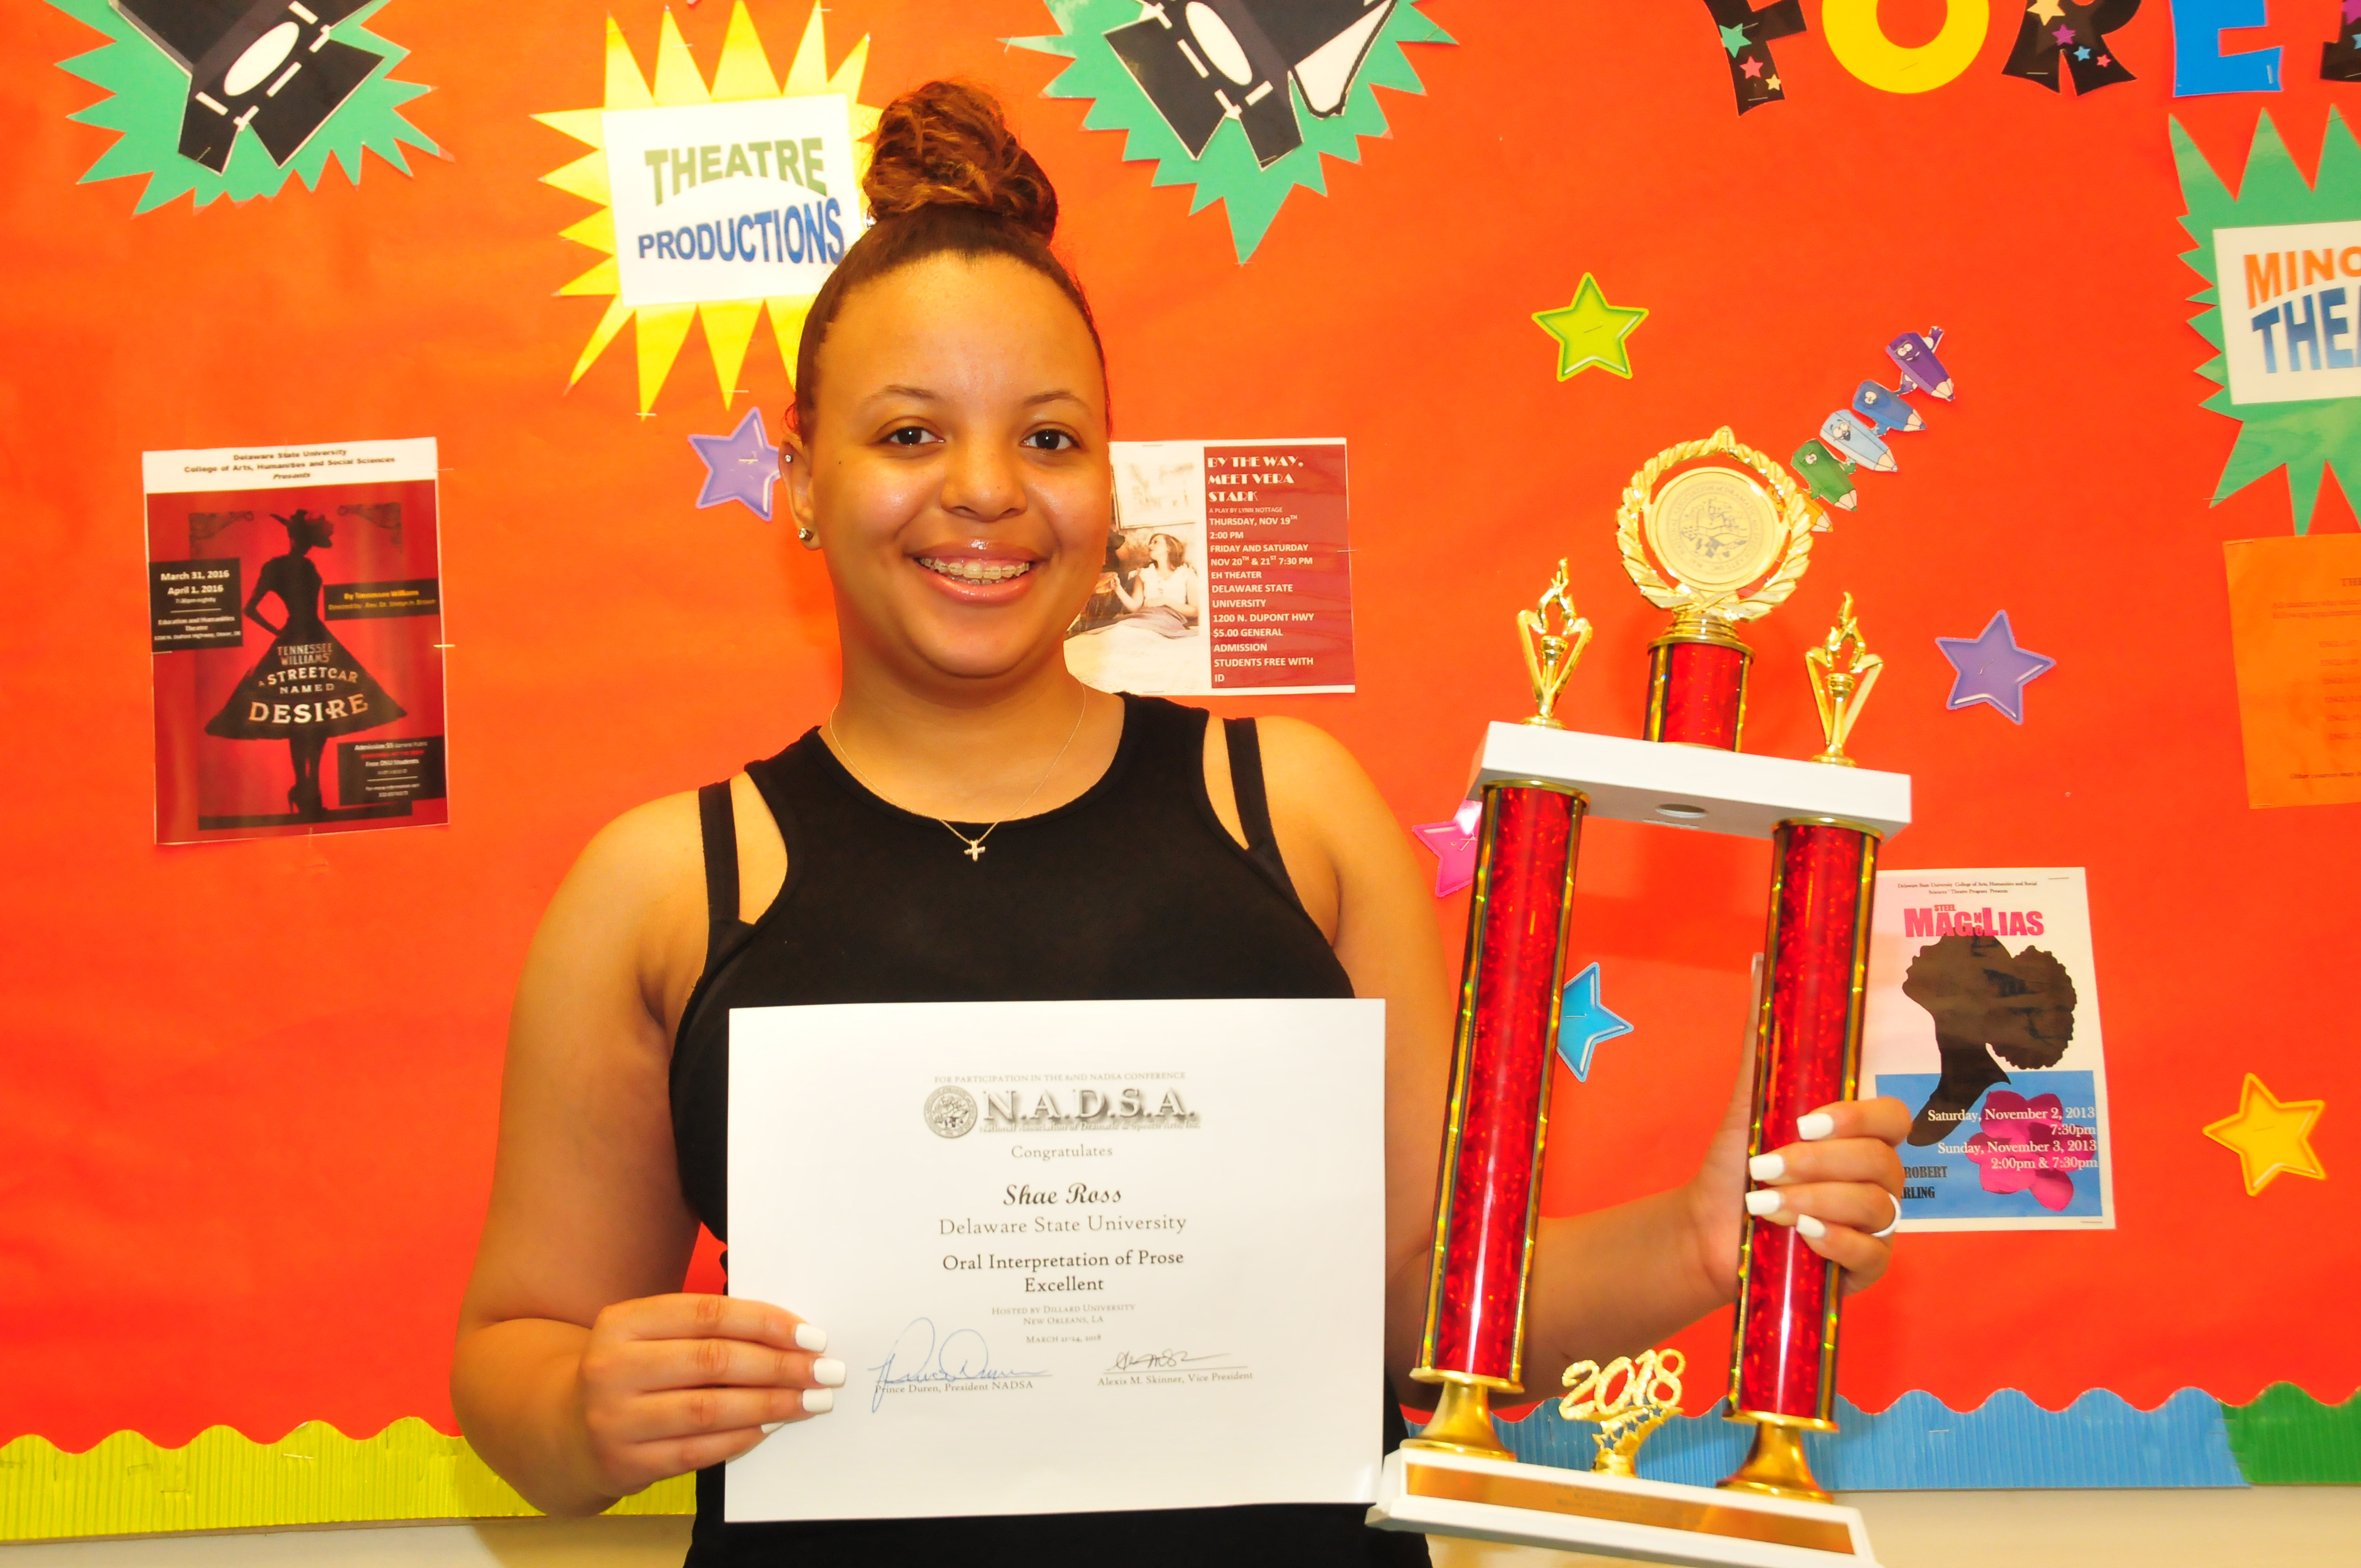 Sháe Ross wins 2nd place in national stage competiton